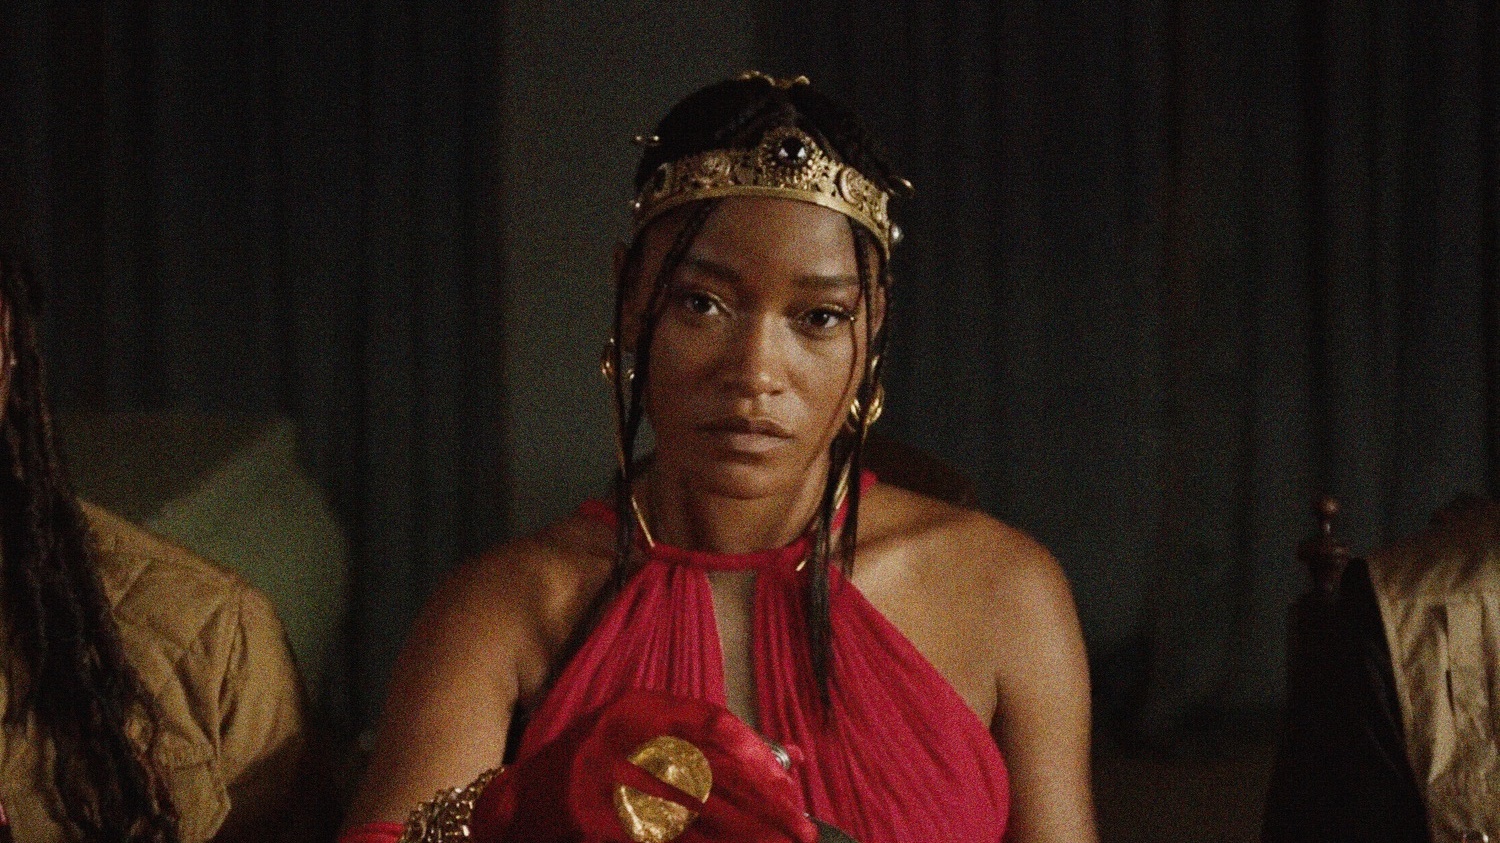 <strong>Keke Palmer Reclaims Her Voice With New Visual Album</strong>